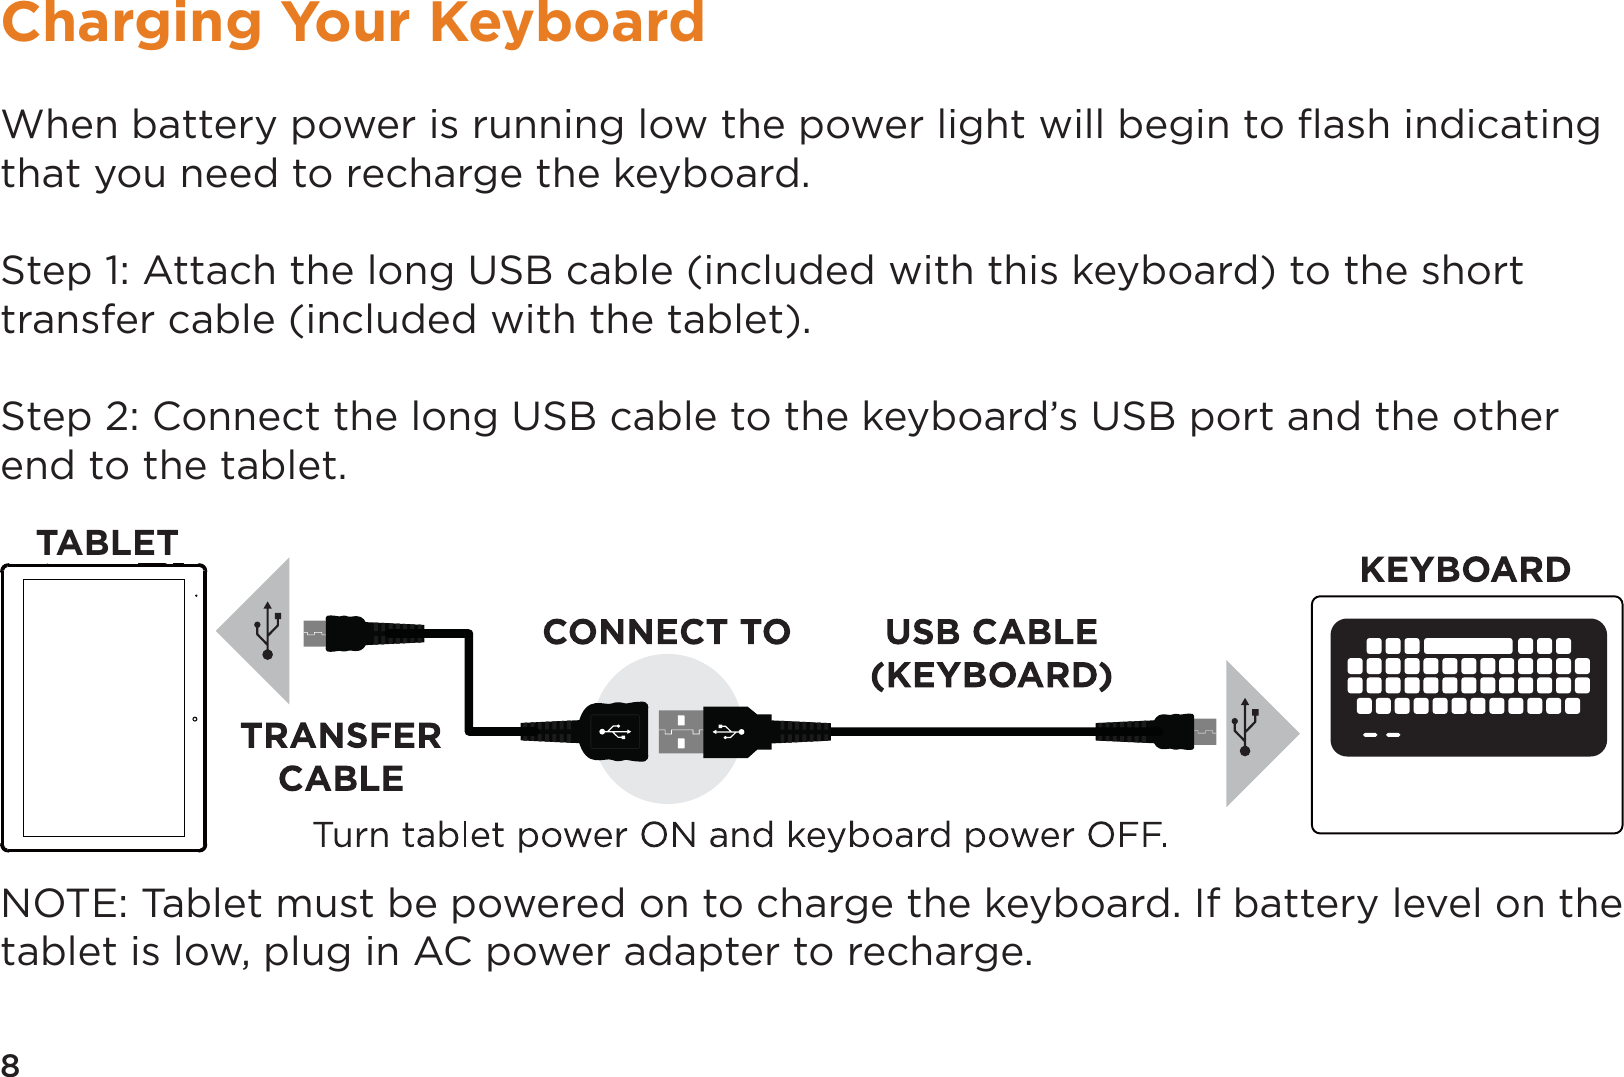 8Charging Your KeyboardWhen battery power is running low the power light will begin to ﬂash indicating that you need to recharge the keyboard.Step 1: Attach the long USB cable (included with this keyboard) to the short transfer cable (included with the tablet).Step 2: Connect the long USB cable to the keyboard’s USB port and the other end to the tablet.NOTE: Tablet must be powered on to charge the keyboard. If battery level on the tablet is low, plug in AC power adapter to recharge.TABLET